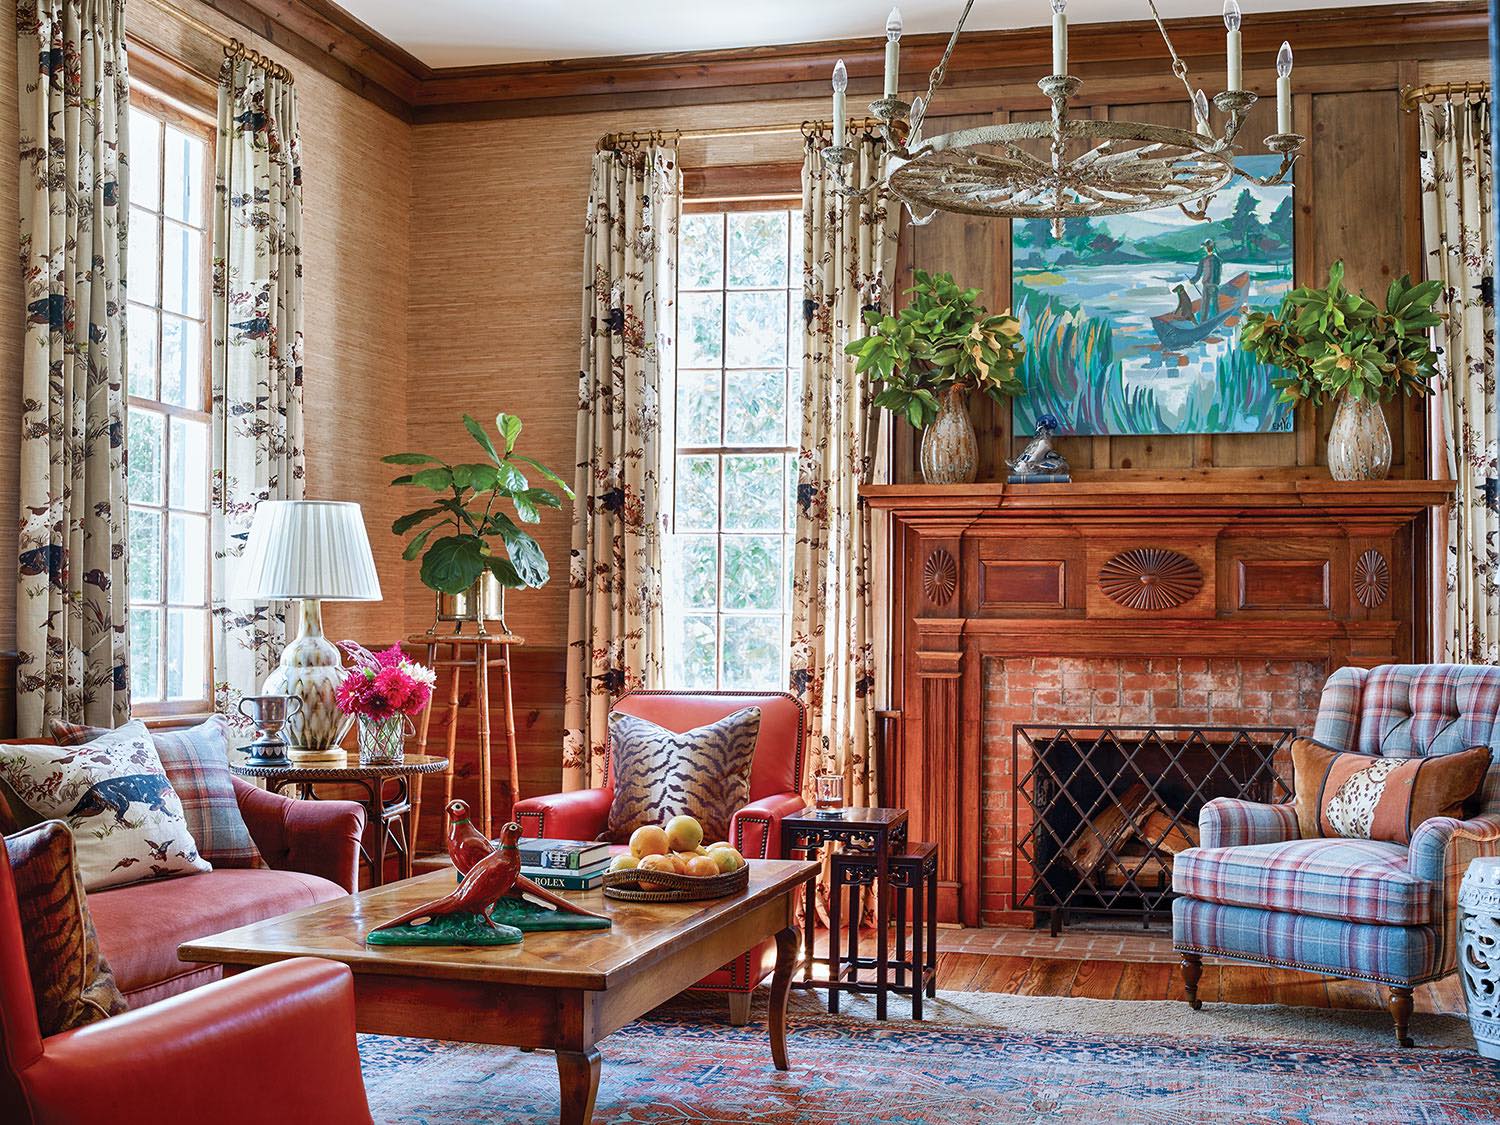 Study with layers of luxe fabrics that soften the paneled walls, millwork and the brick fireplace surround.